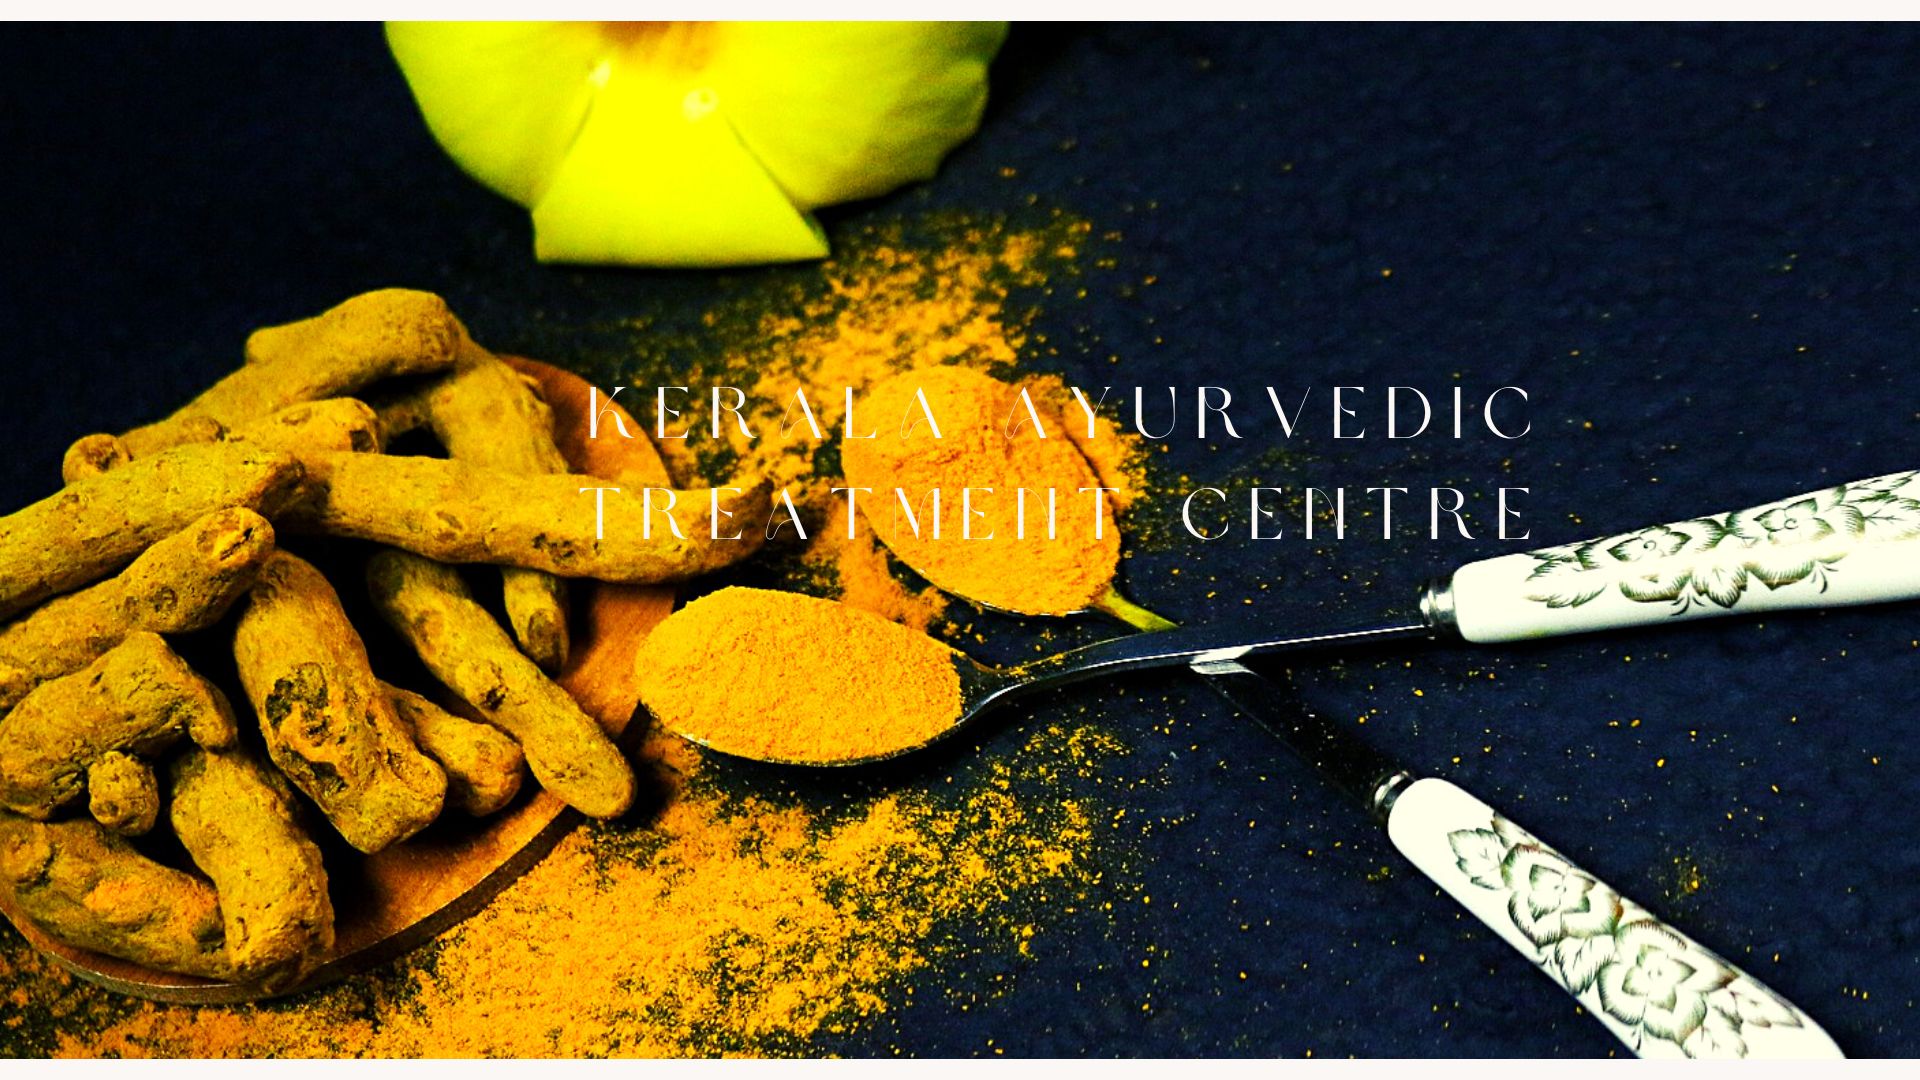 Ayurveda treatment centers in kerala (1)-67a46178